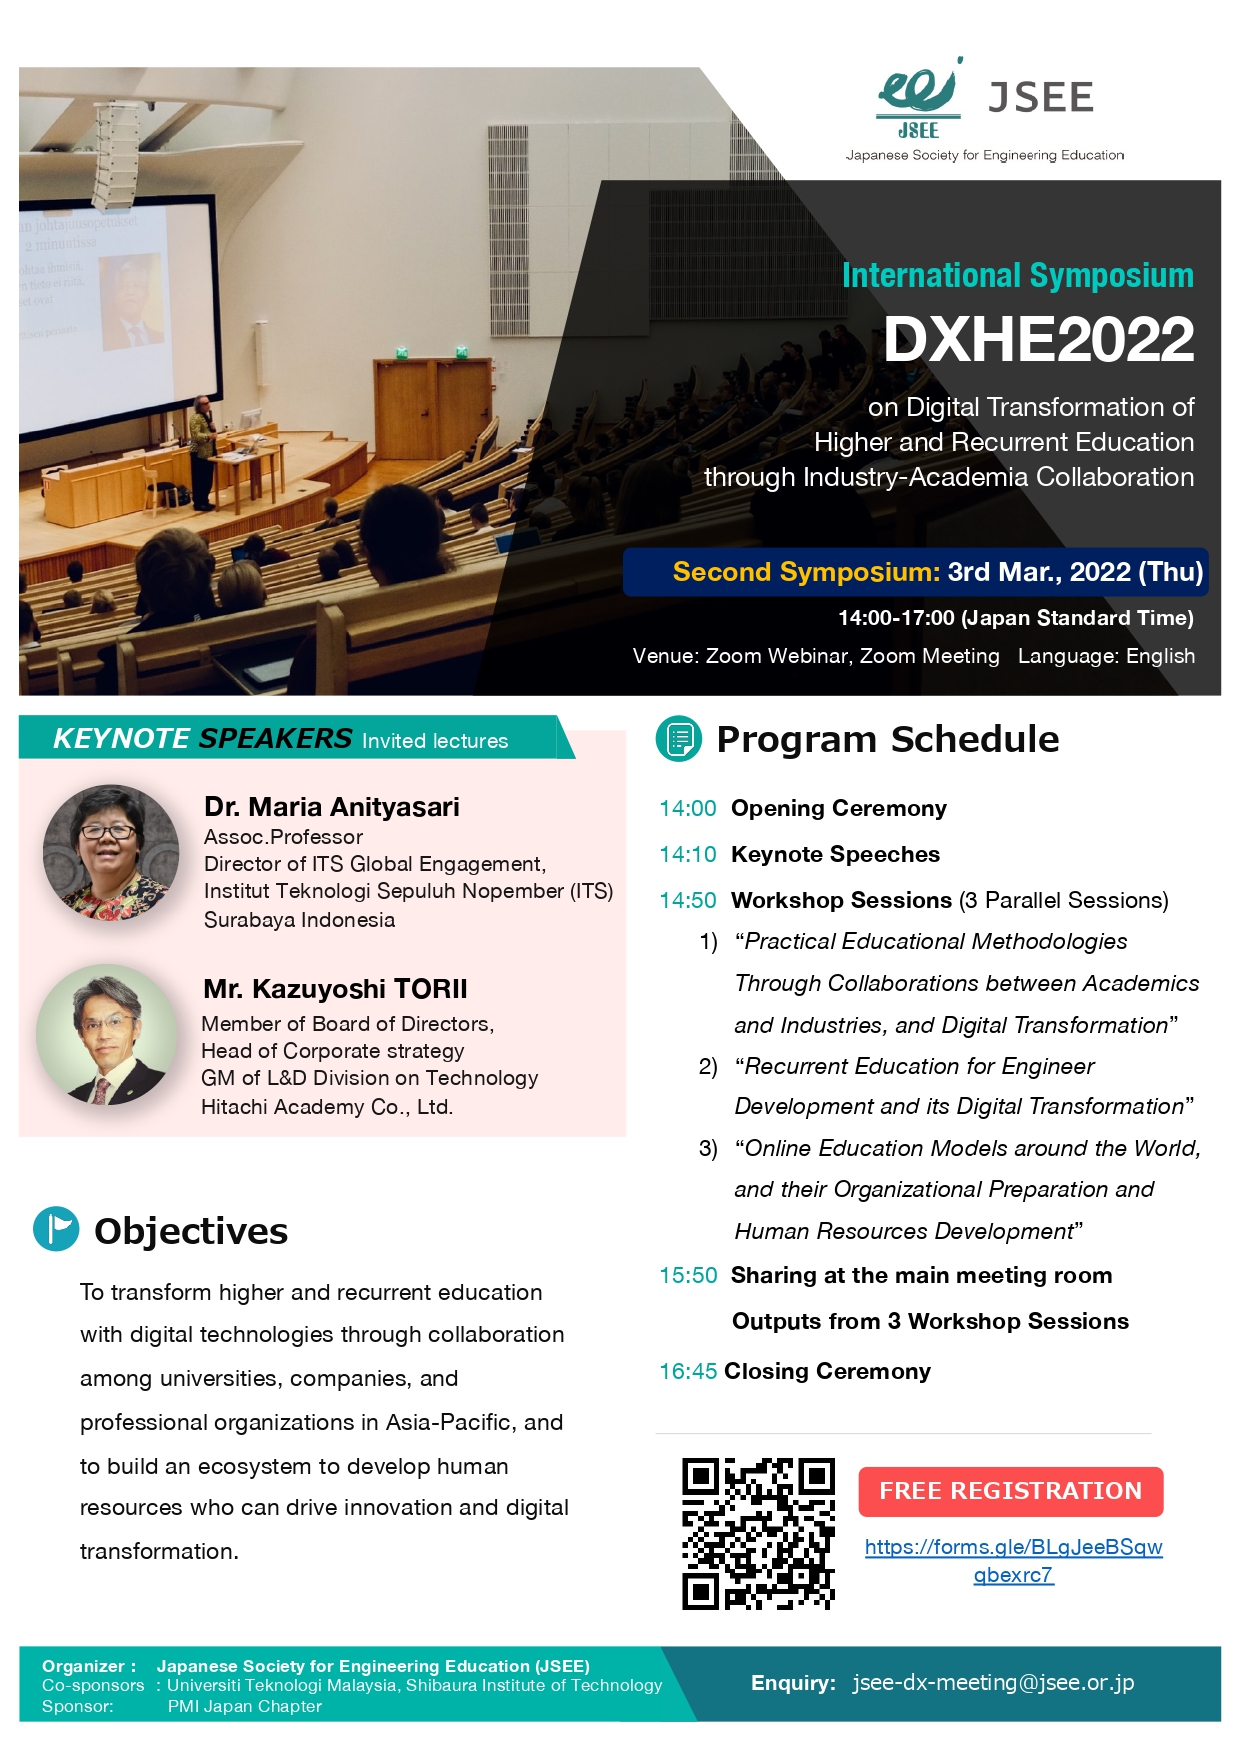 ​​INVITATION TO PARTICIPATE IN INTERNATIONAL SYMPOSIUM FOR DIGITAL TRANSFORMATION OF HIGHER AND RECURRENT EDUCATION THROUGH INDUSTRY ACADEMIA COLLABORATION (DXHE2022)